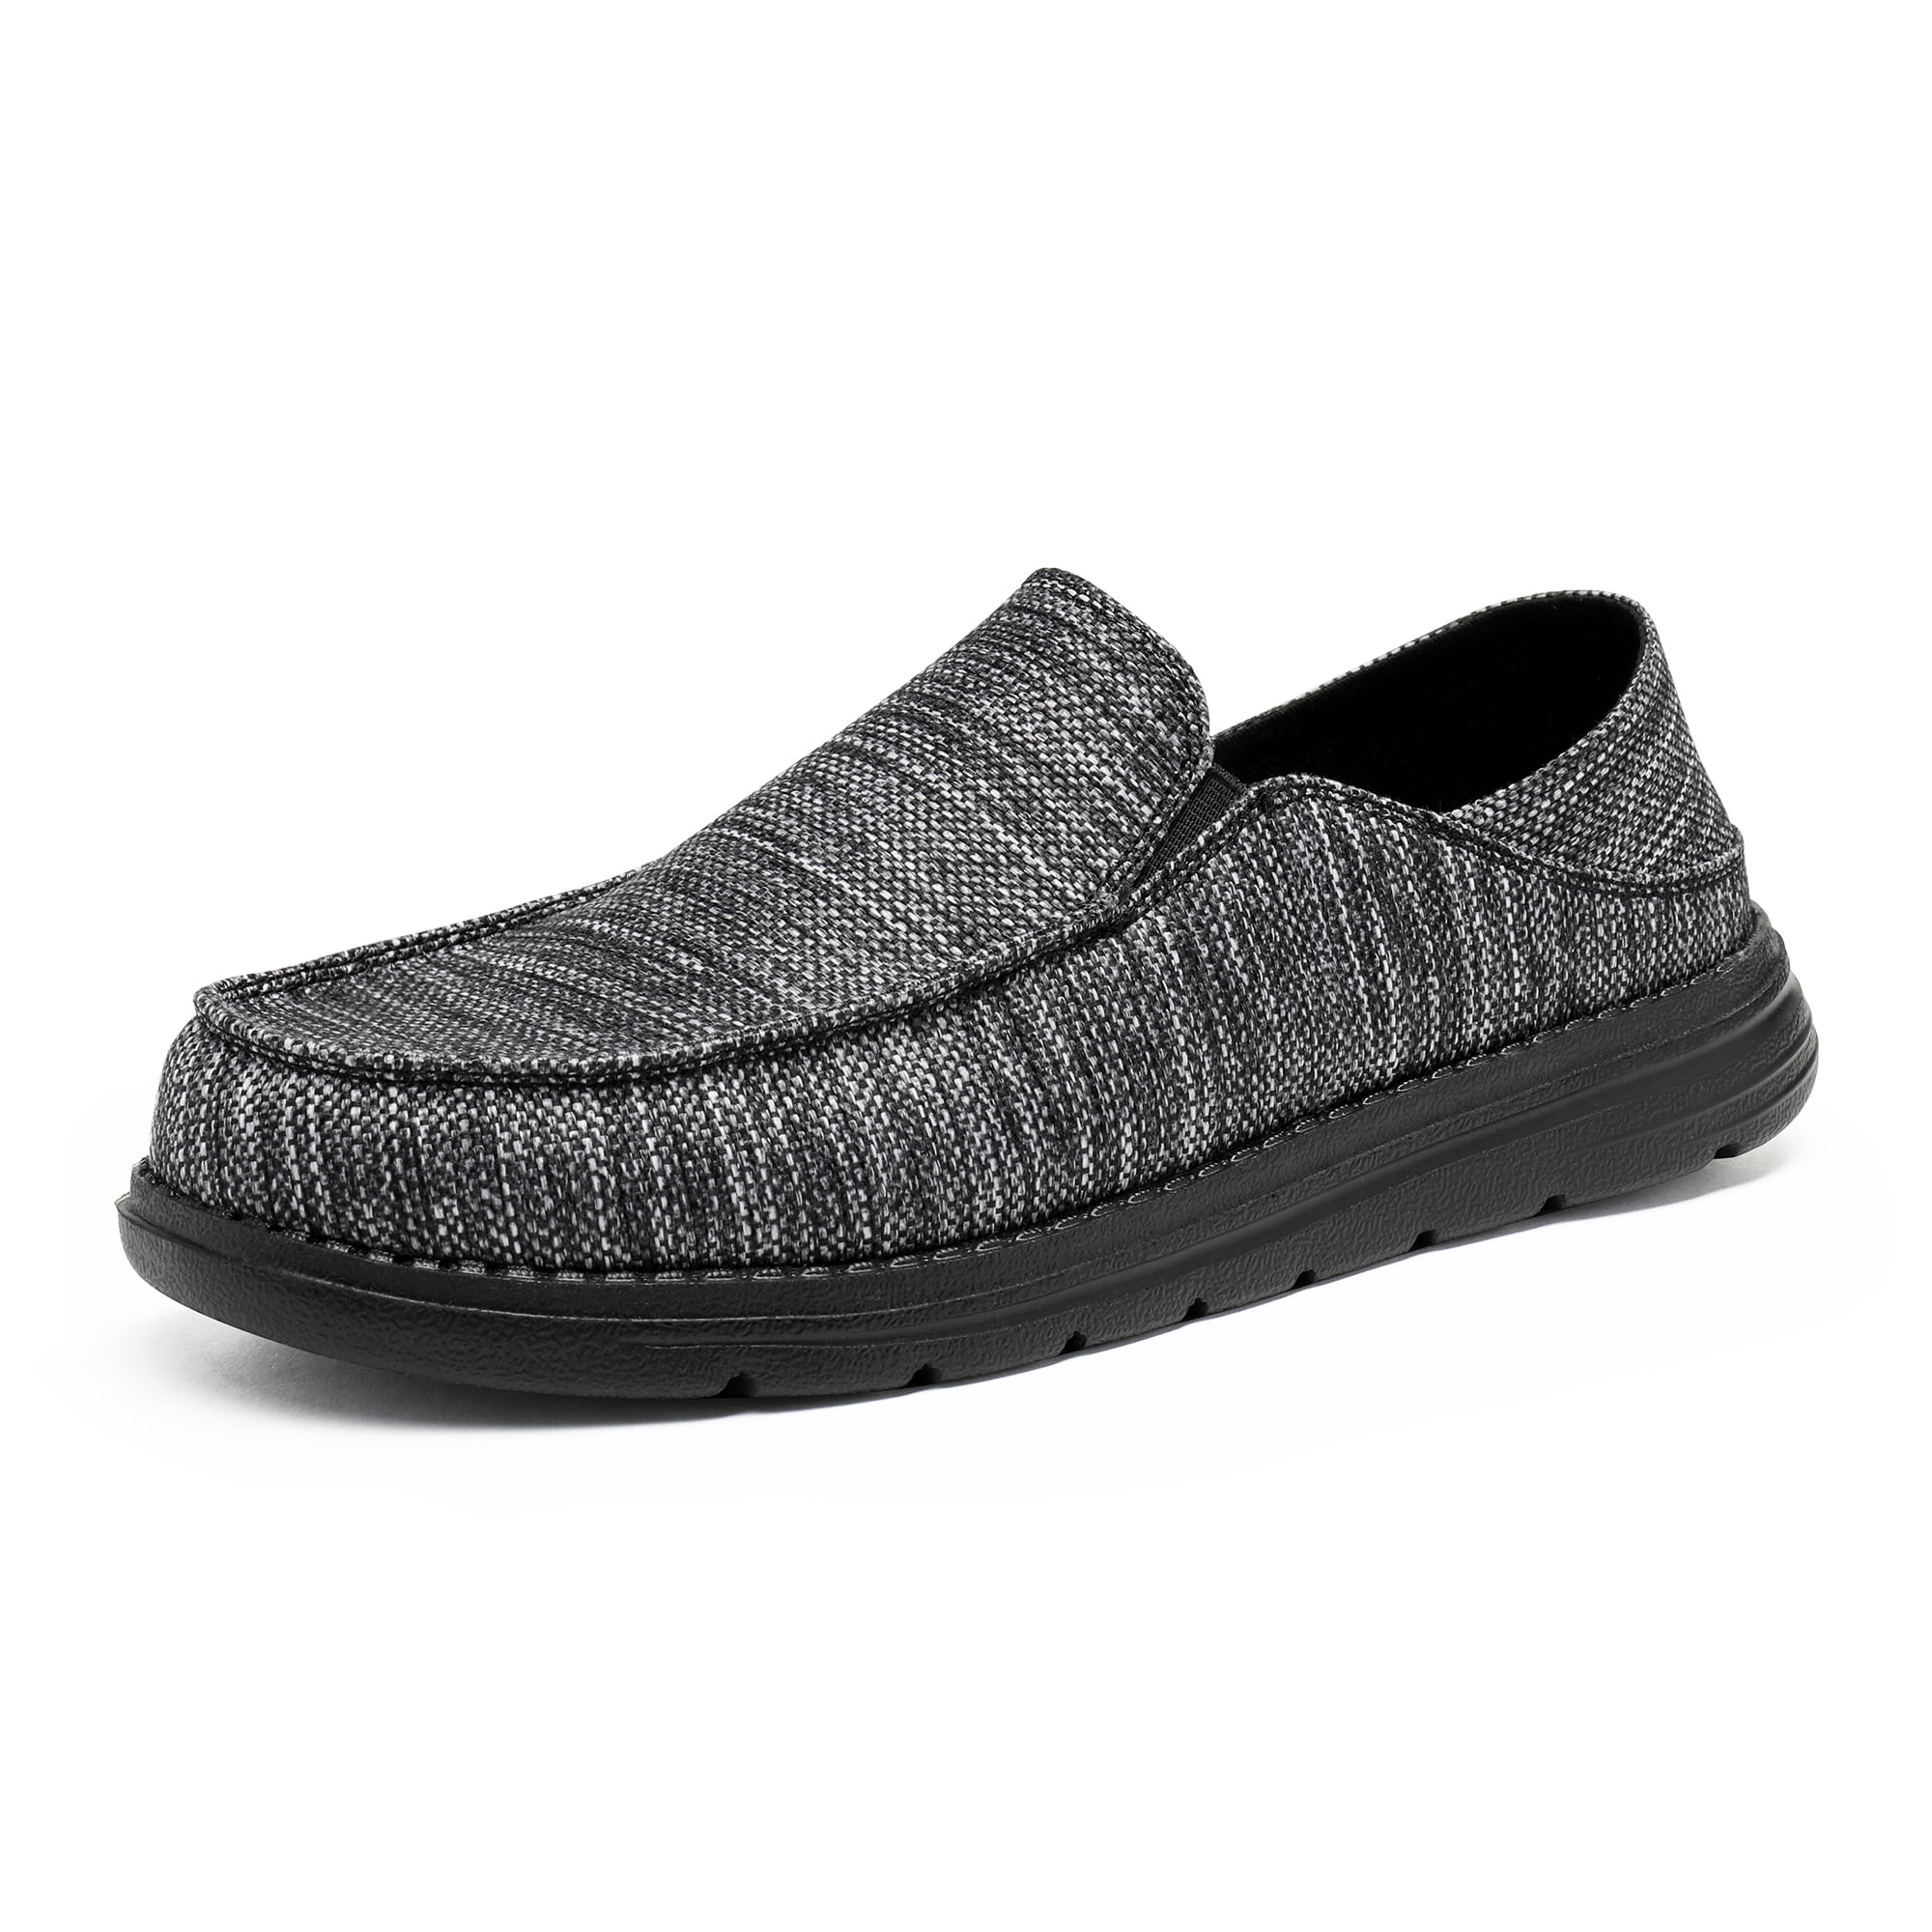 Bruno Marc Men's Casual Slip-on Loafers Stretch Shoes 